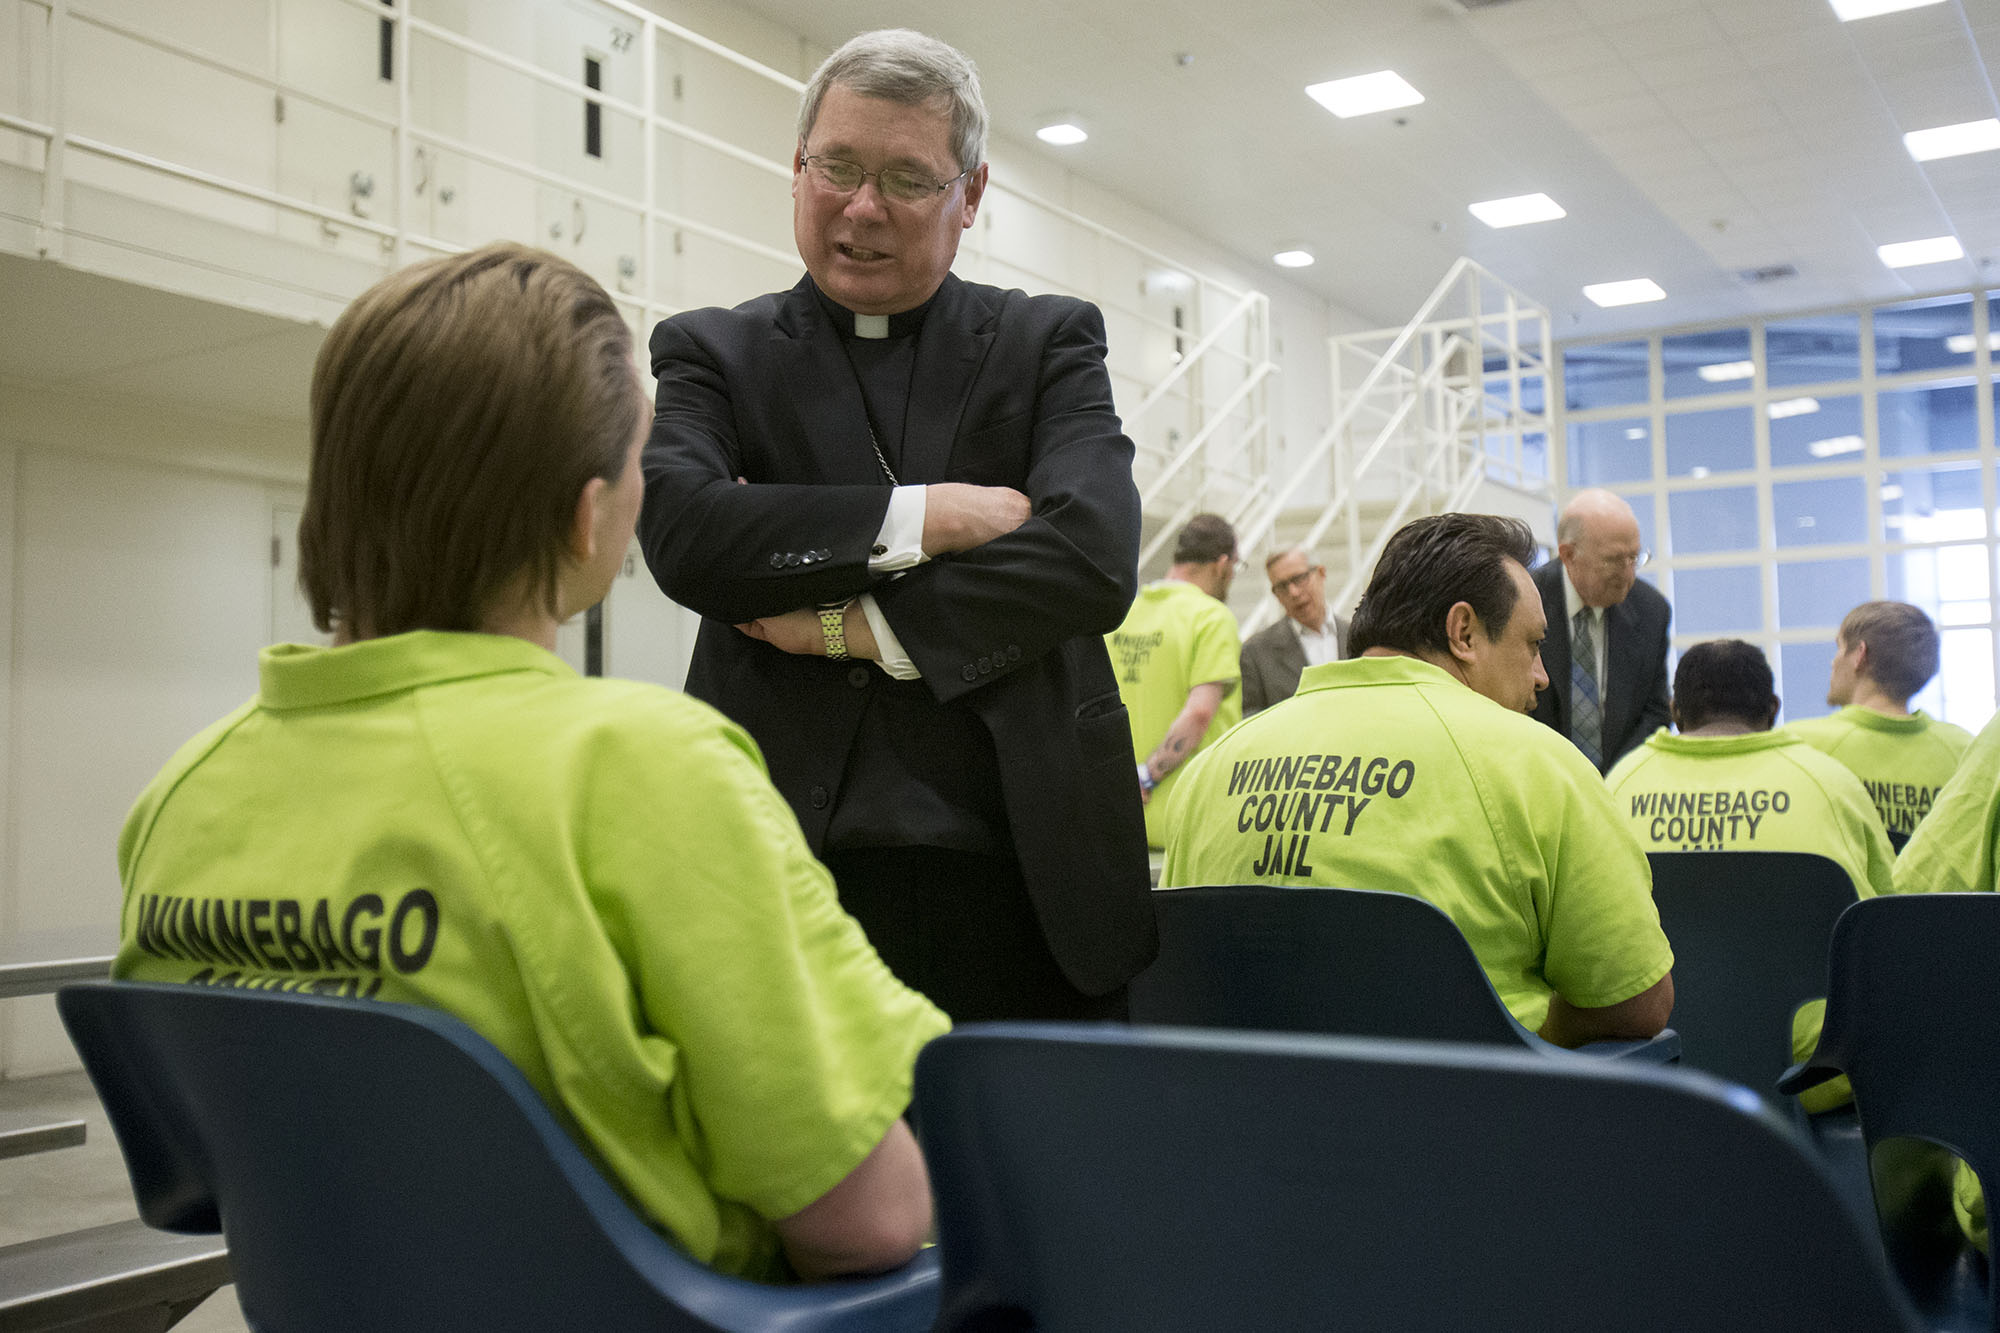 Bishop David J. Malloy talks with Nathanial Davis on Sunday, March 27, 2016, after Easter Mass at the Winnebago County Jail in Rockford. MAX GERSH/STAFF PHOTOGRAPHER/RRSTAR.COM ©2016